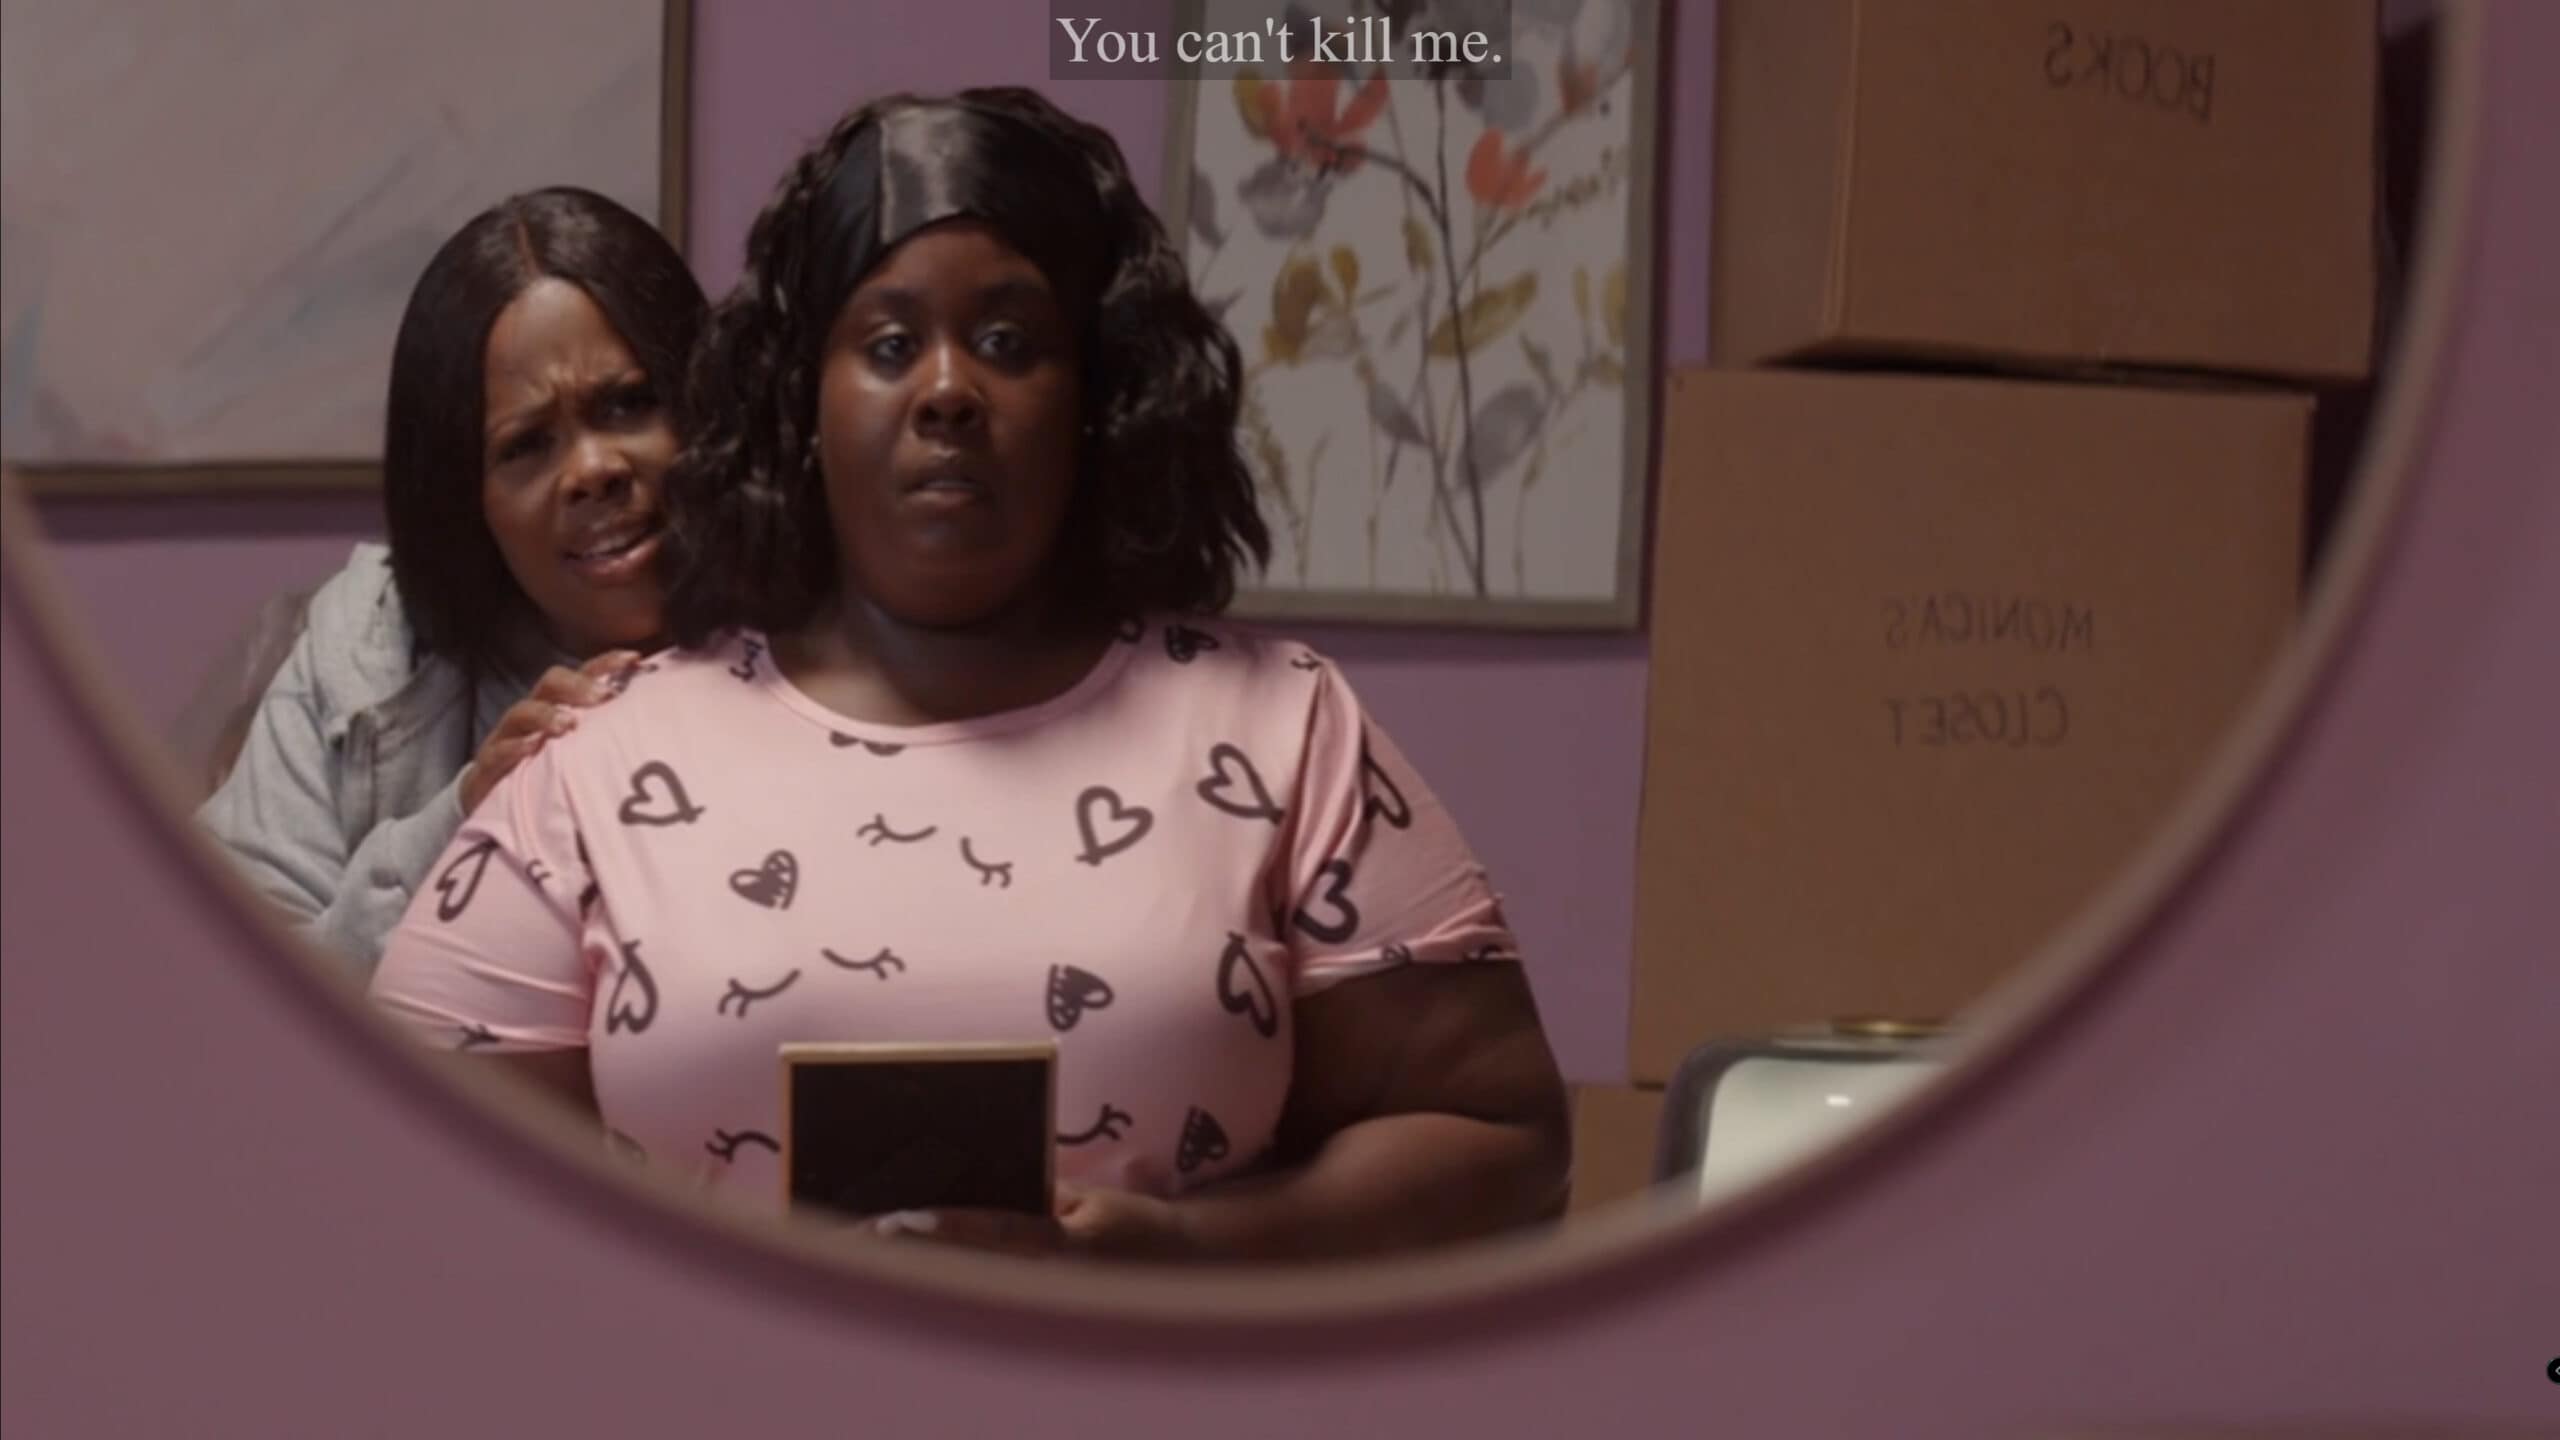 Monica (Raven Goodwin) seeing Simone (Amber Riley) in the mirror, haunting her